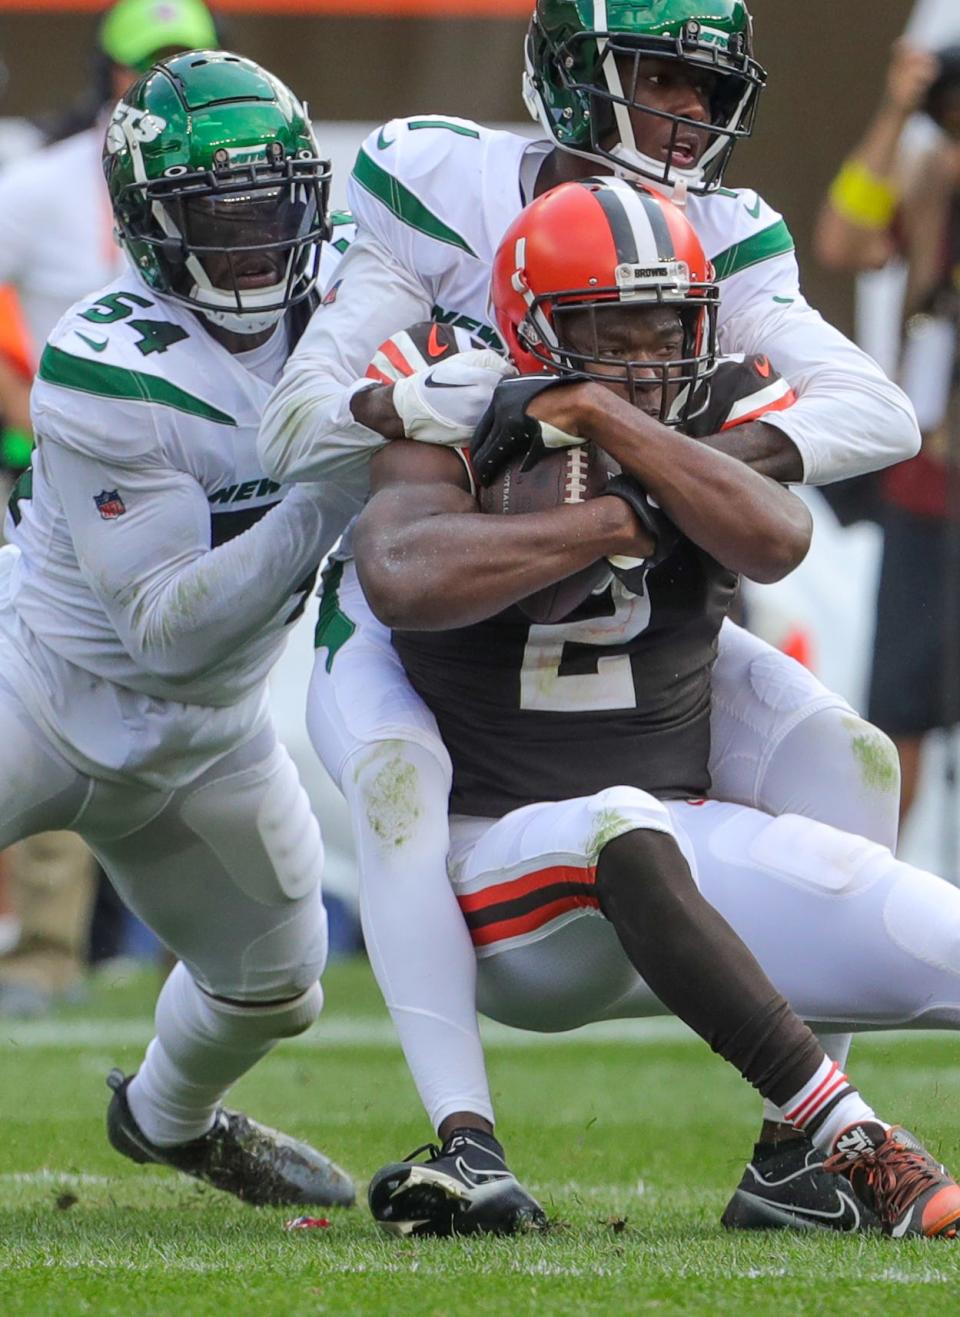 Browns receiver Amari Cooper fights for extra yardage after a catch against the New York Jets, Sunday, Sept. 18, 2022 in Cleveland.